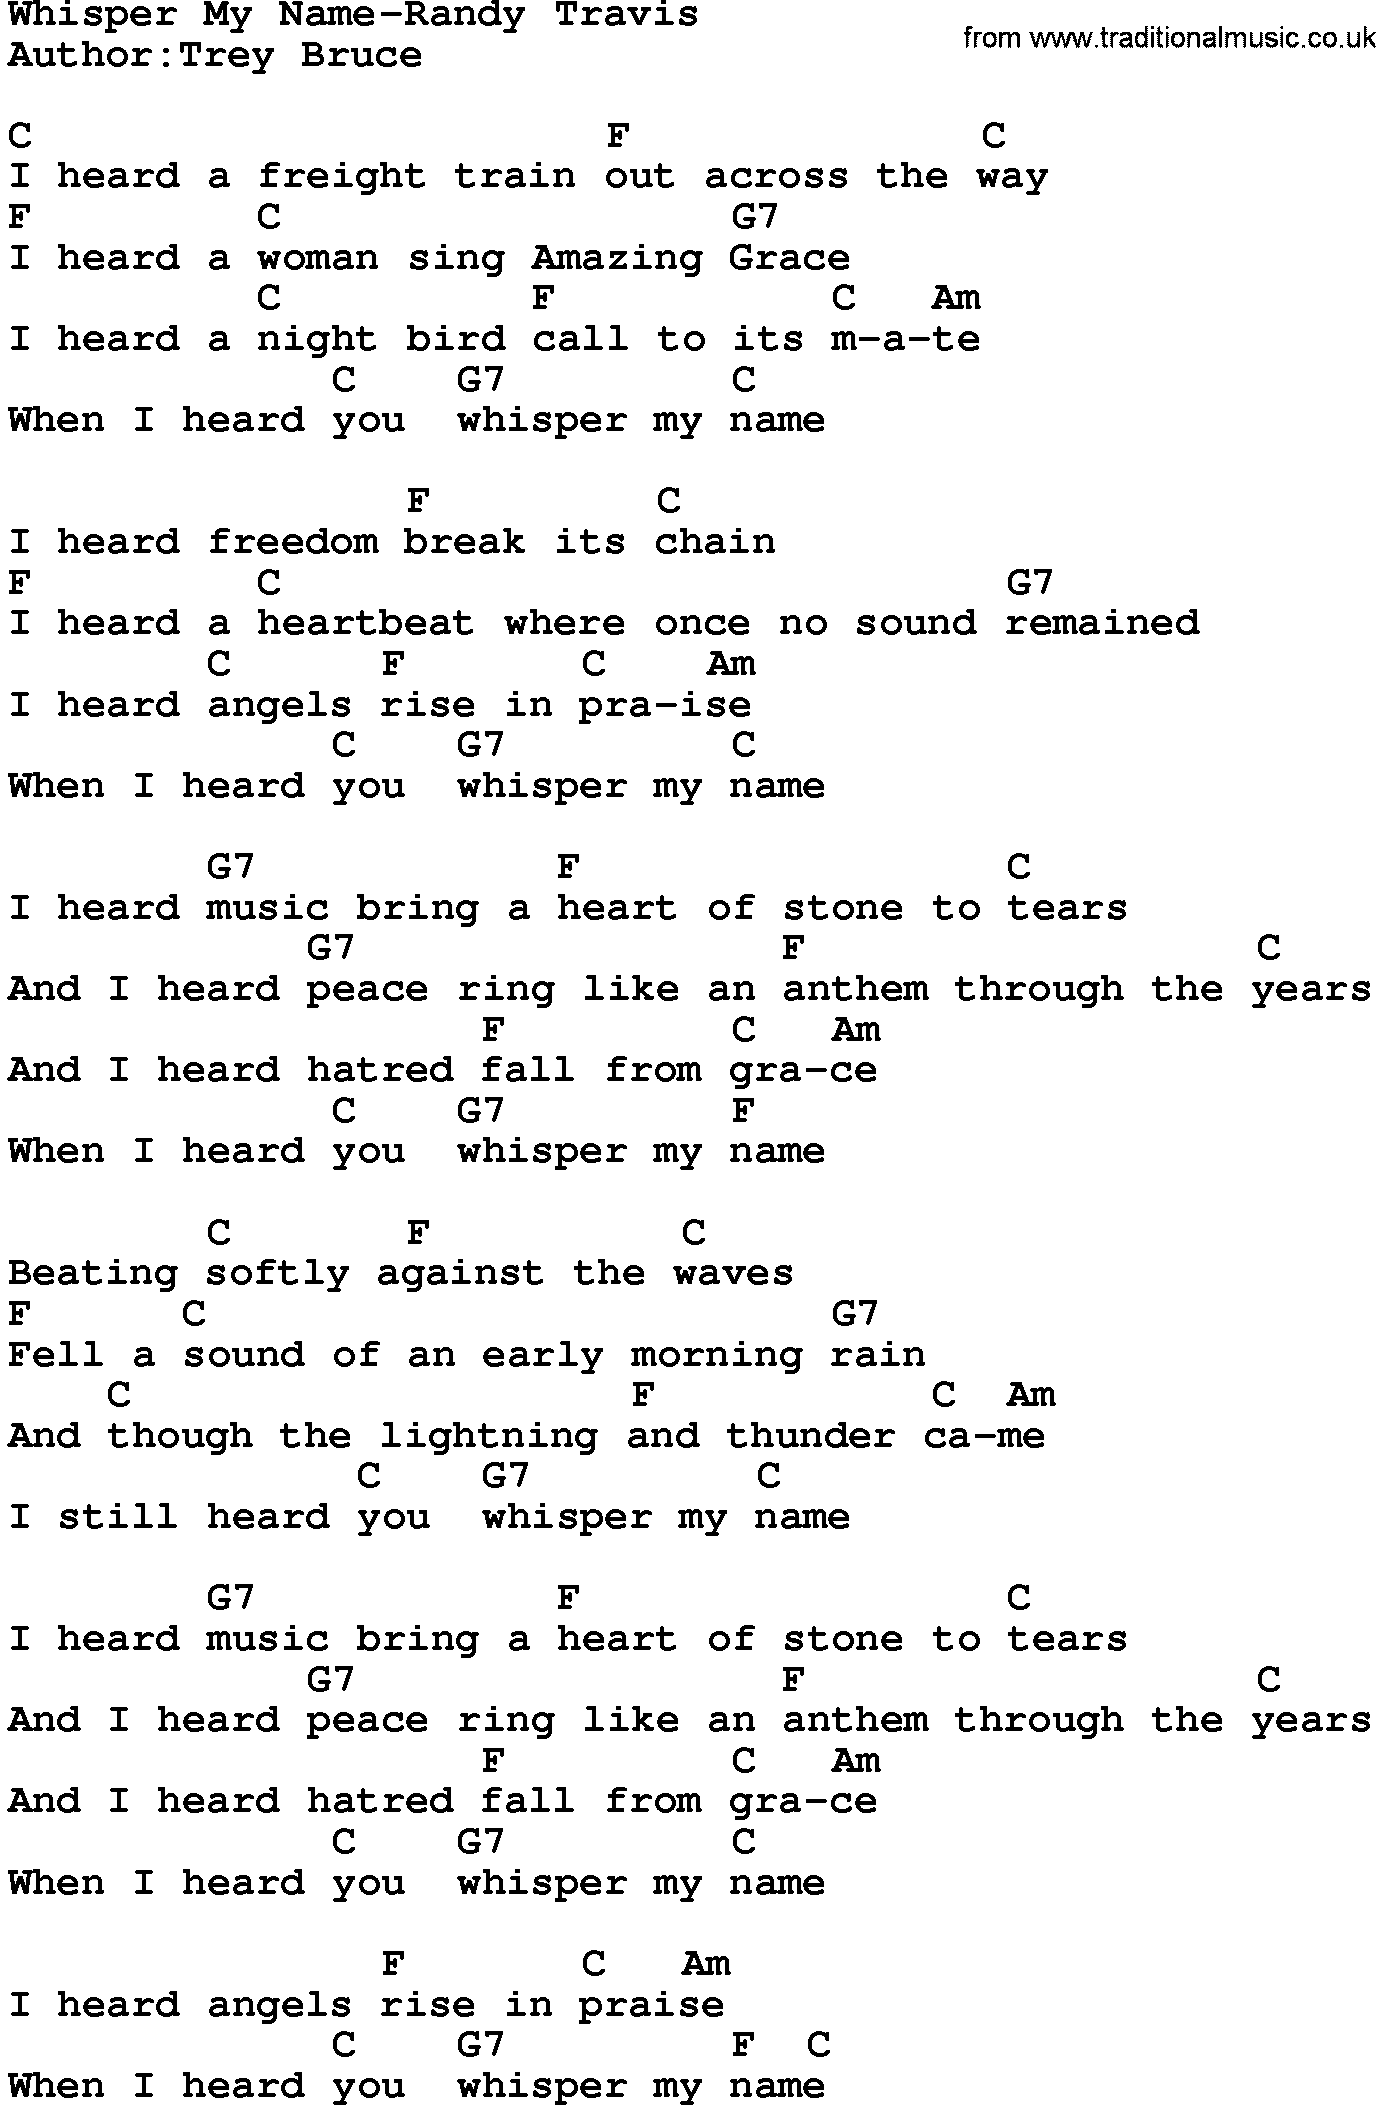 Country music song: Whisper My Name-Randy Travis lyrics and chords